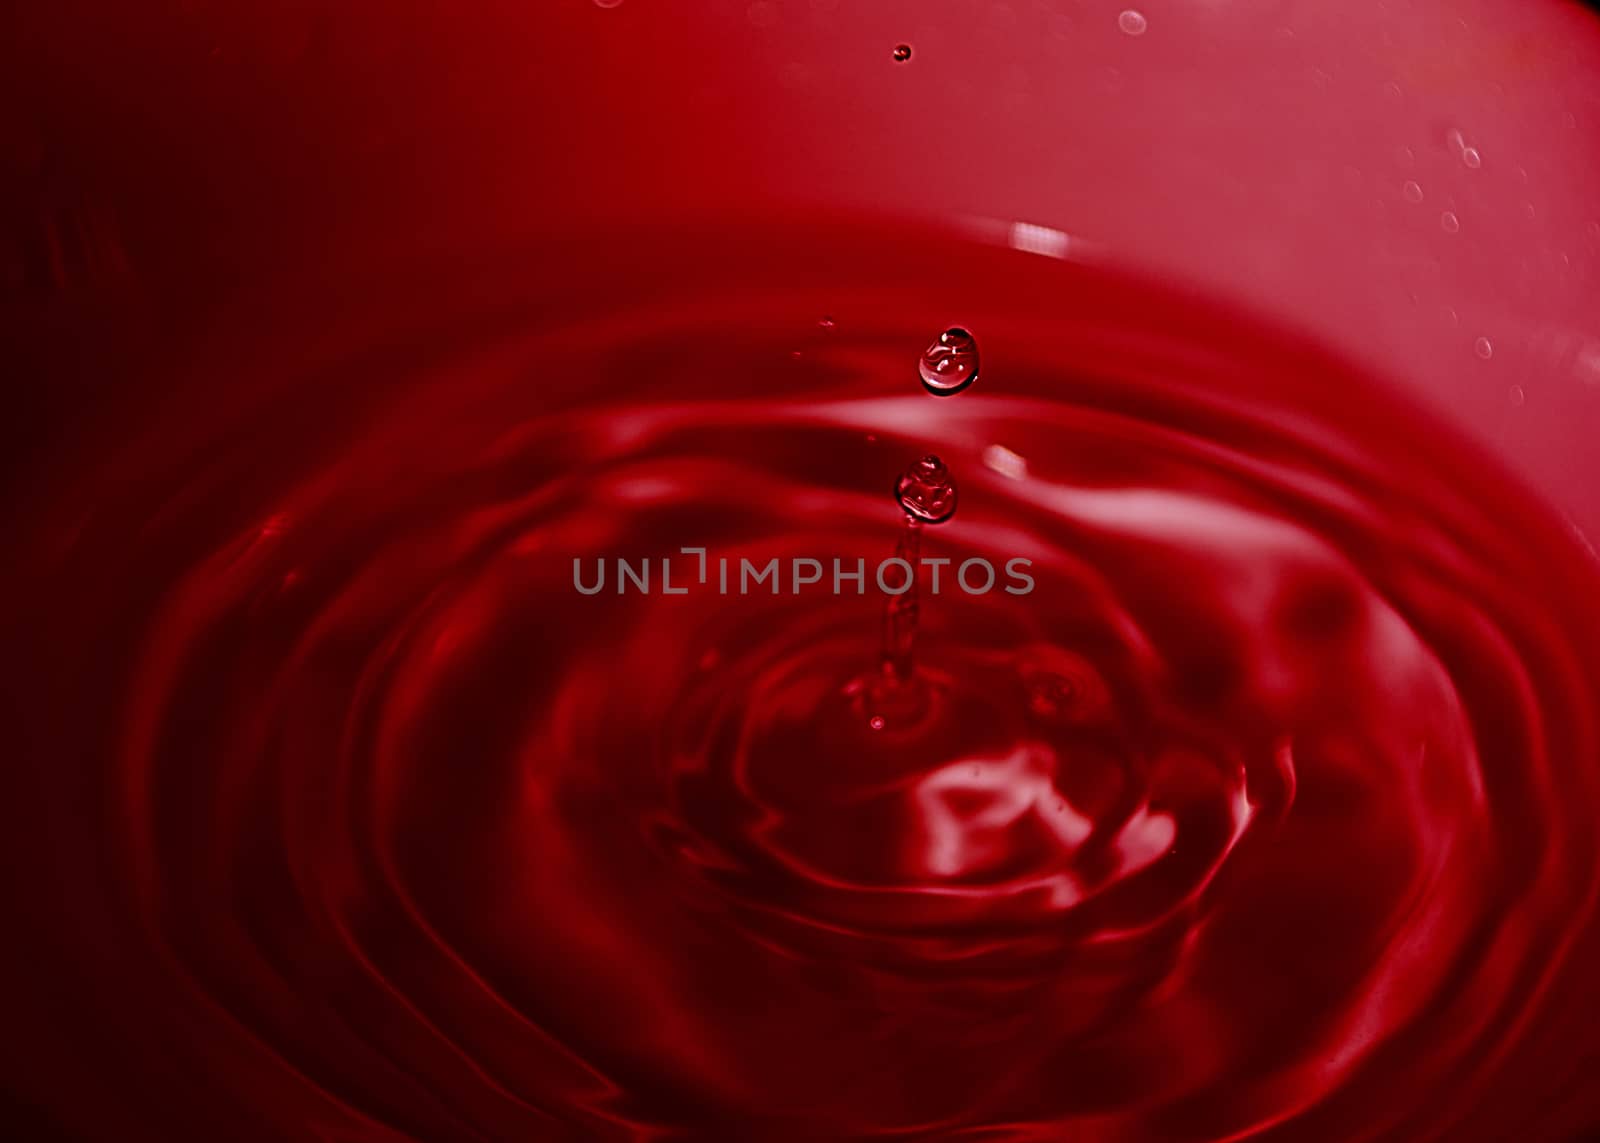 Drop of water on white bowl, red tones by raul_ruiz